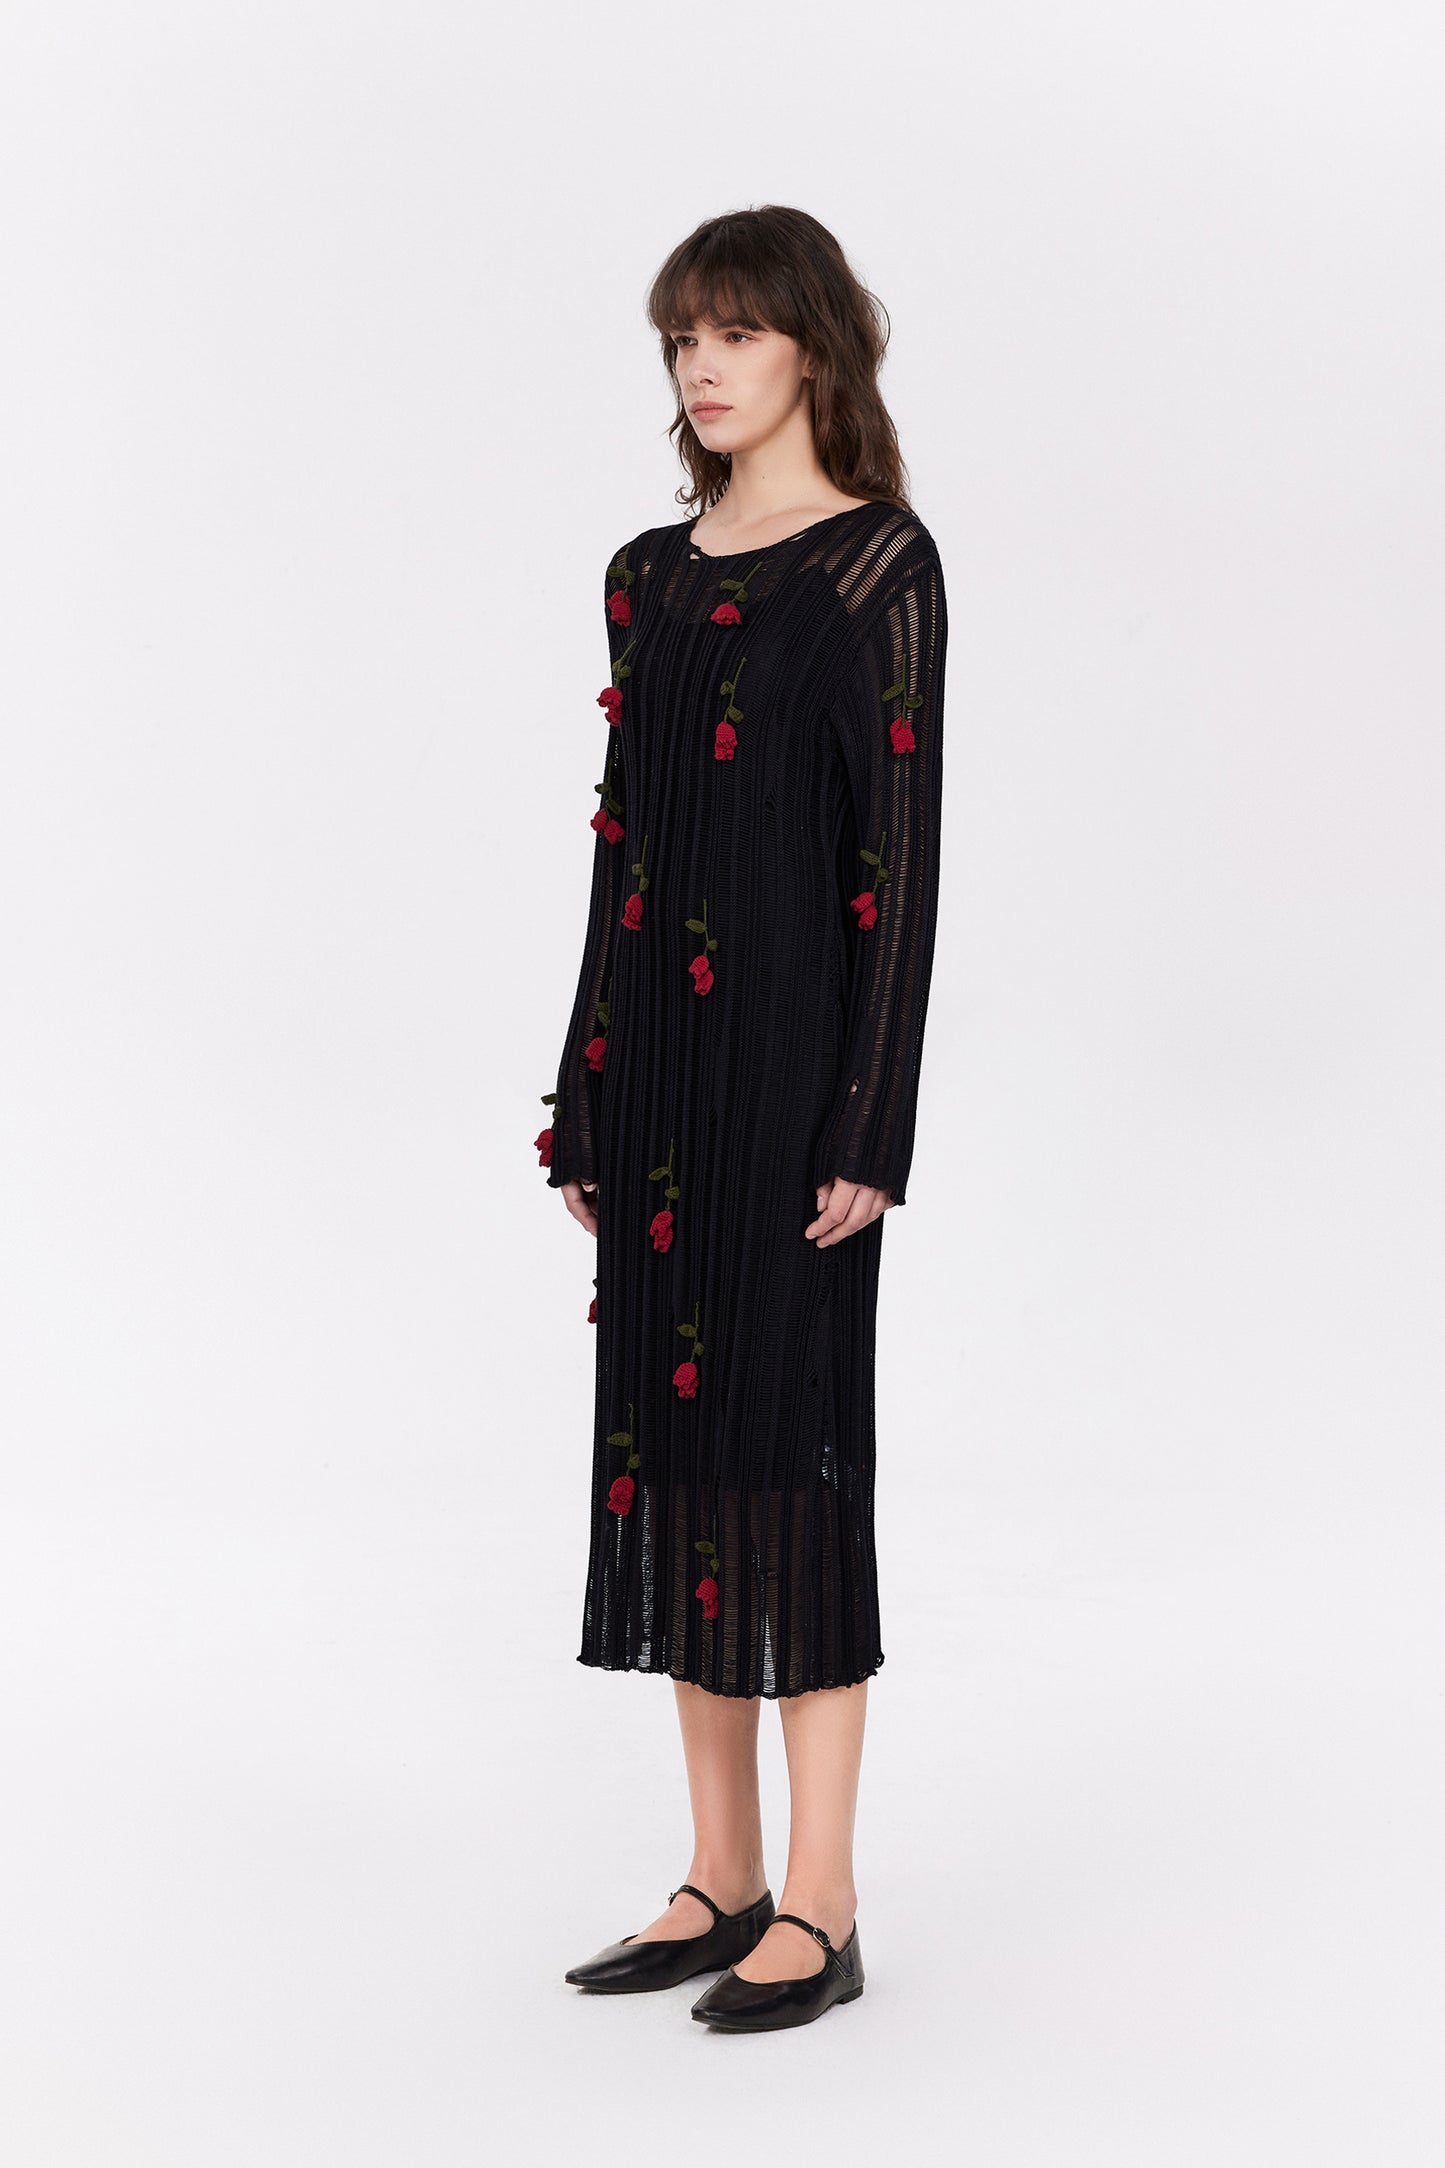 Convallaria Handcrafted Crochet Long Sleeve Dress in Cotton Viscose Knit